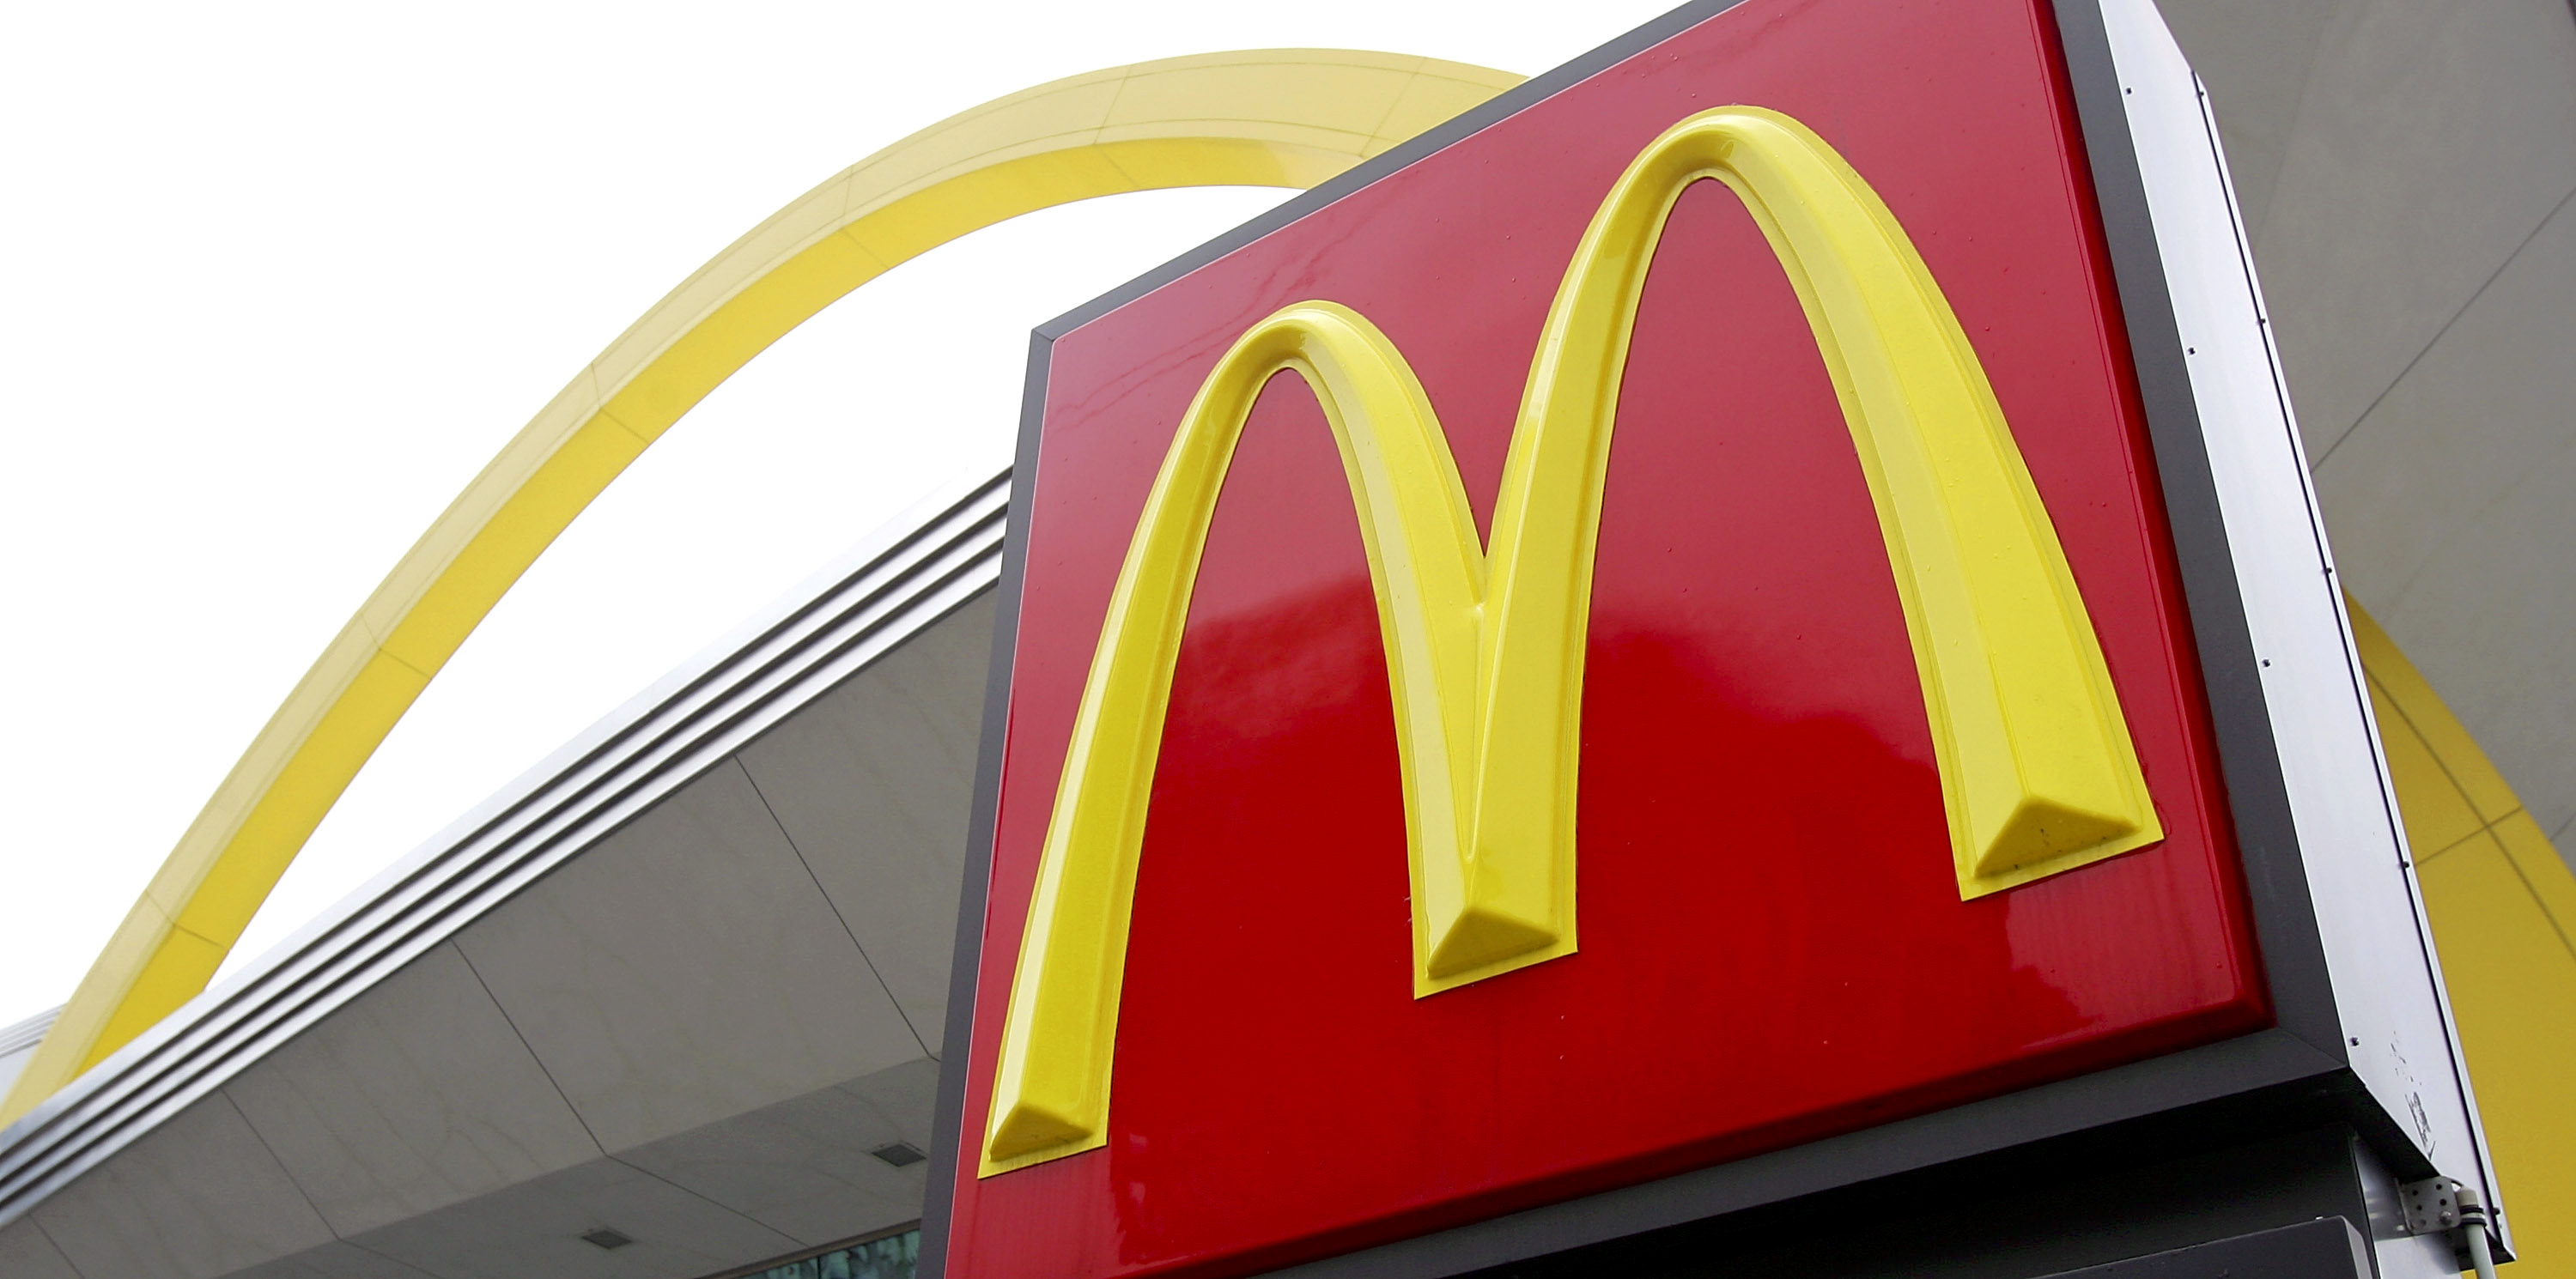 The McDonald's arches logo is displayed outside a McDonald's